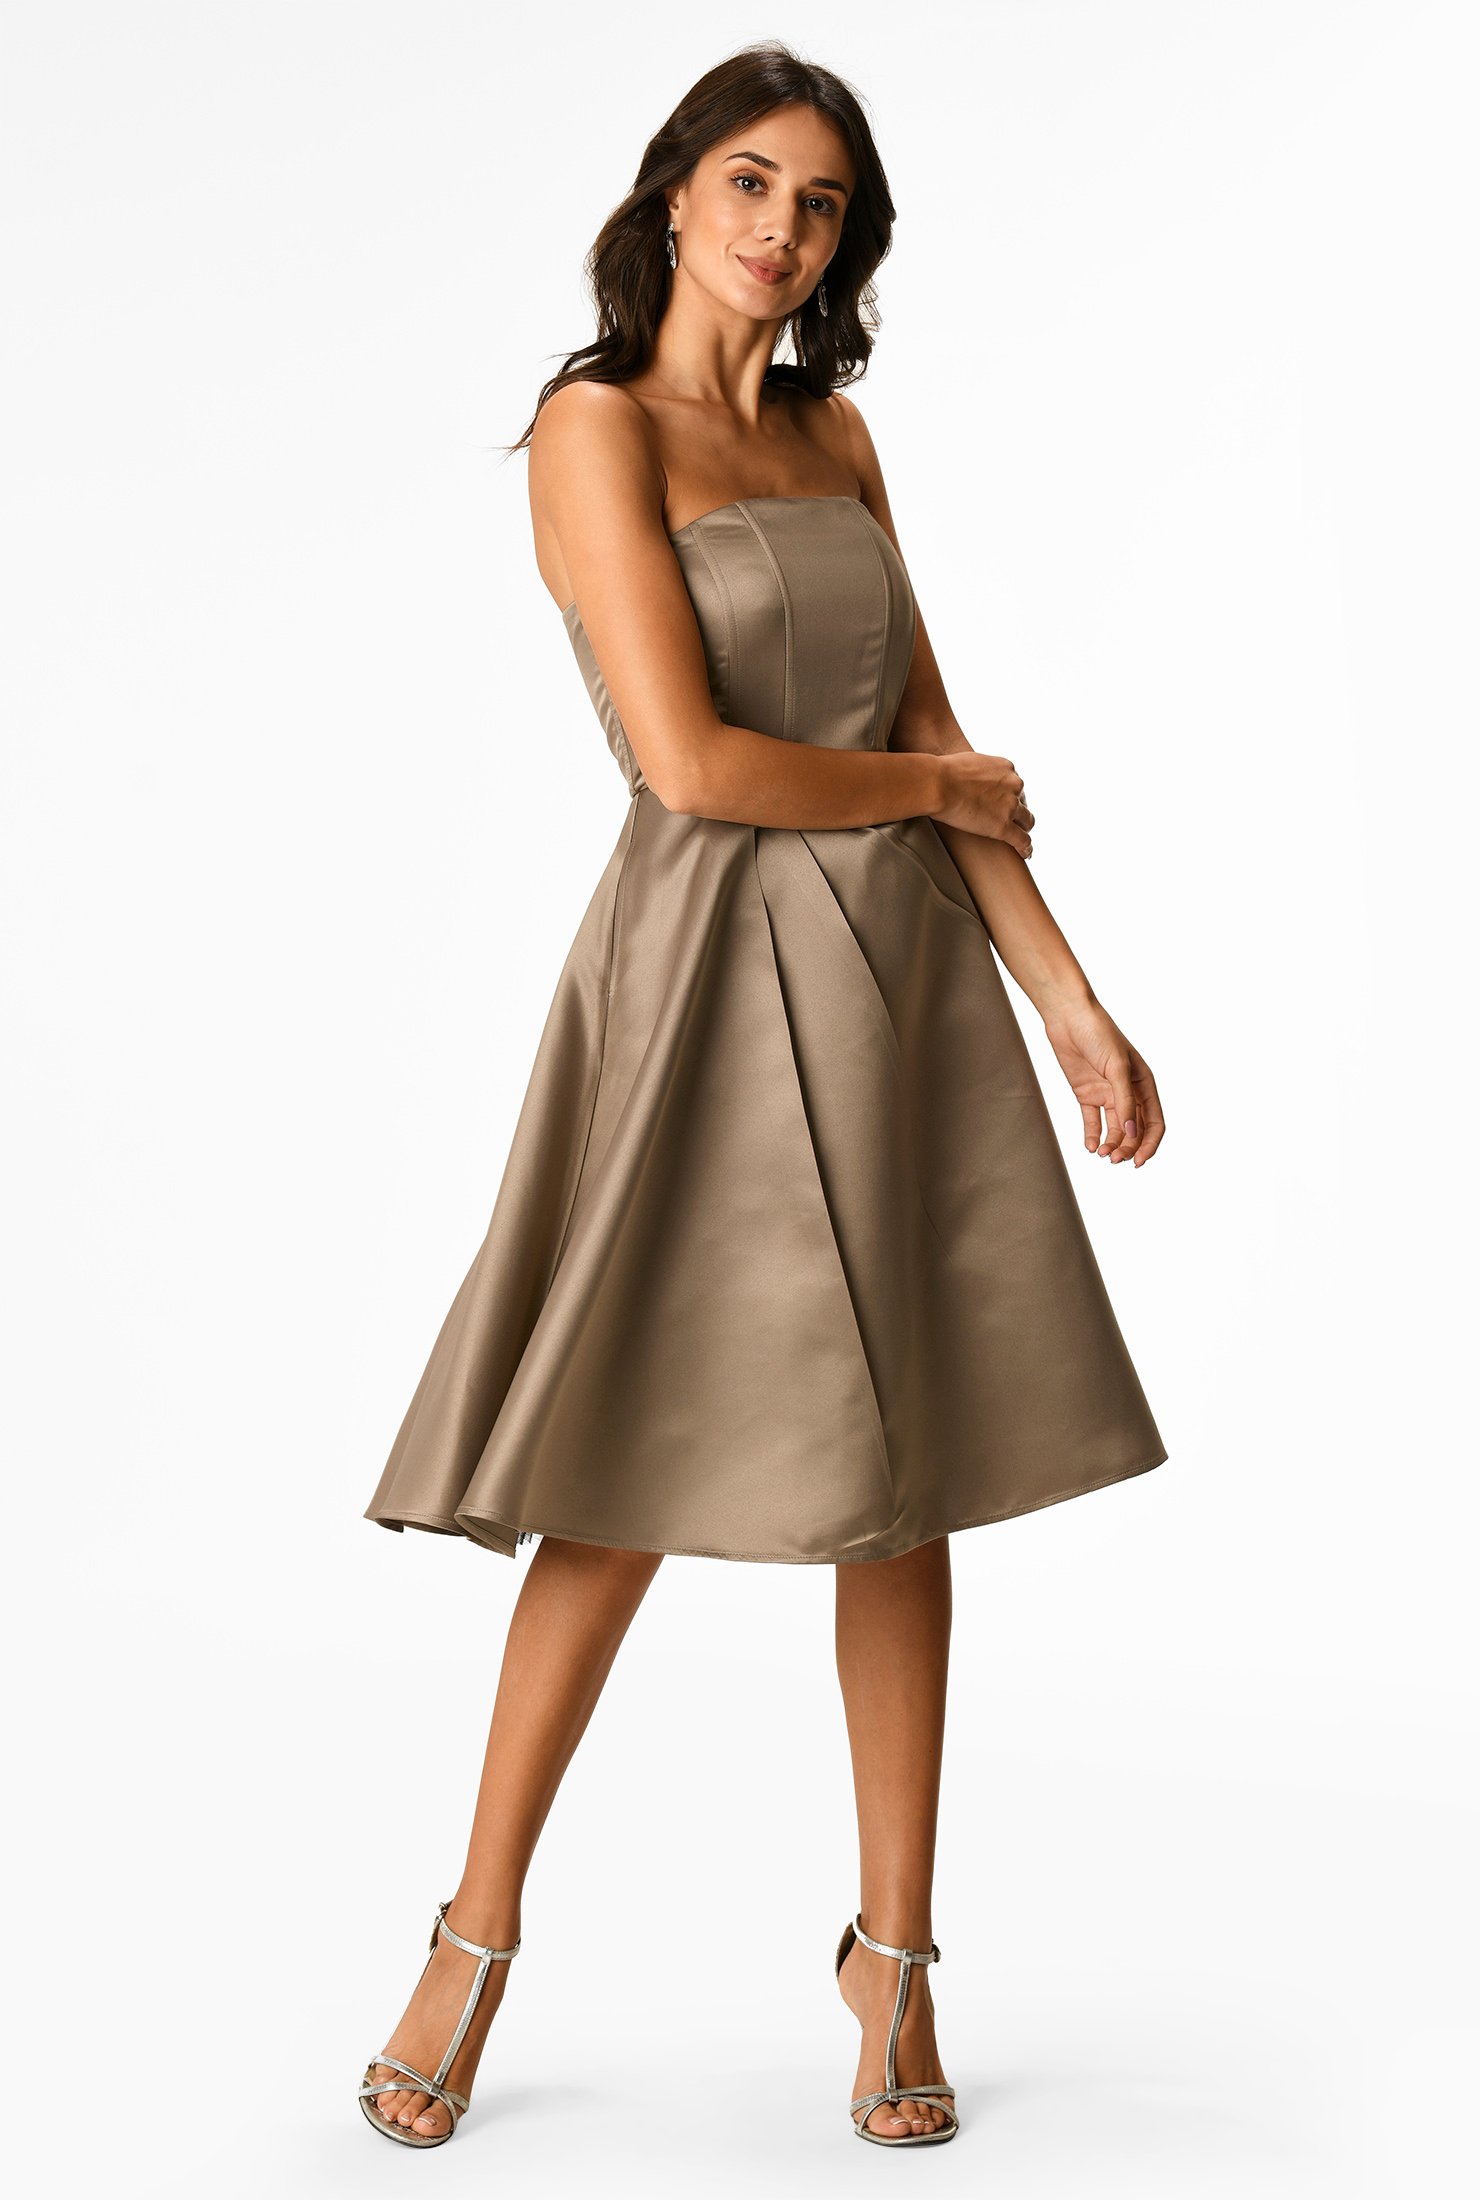 Our satin dress is styled with a strapless bodice and flared out to a full skirt with asymmetric angled pleats.